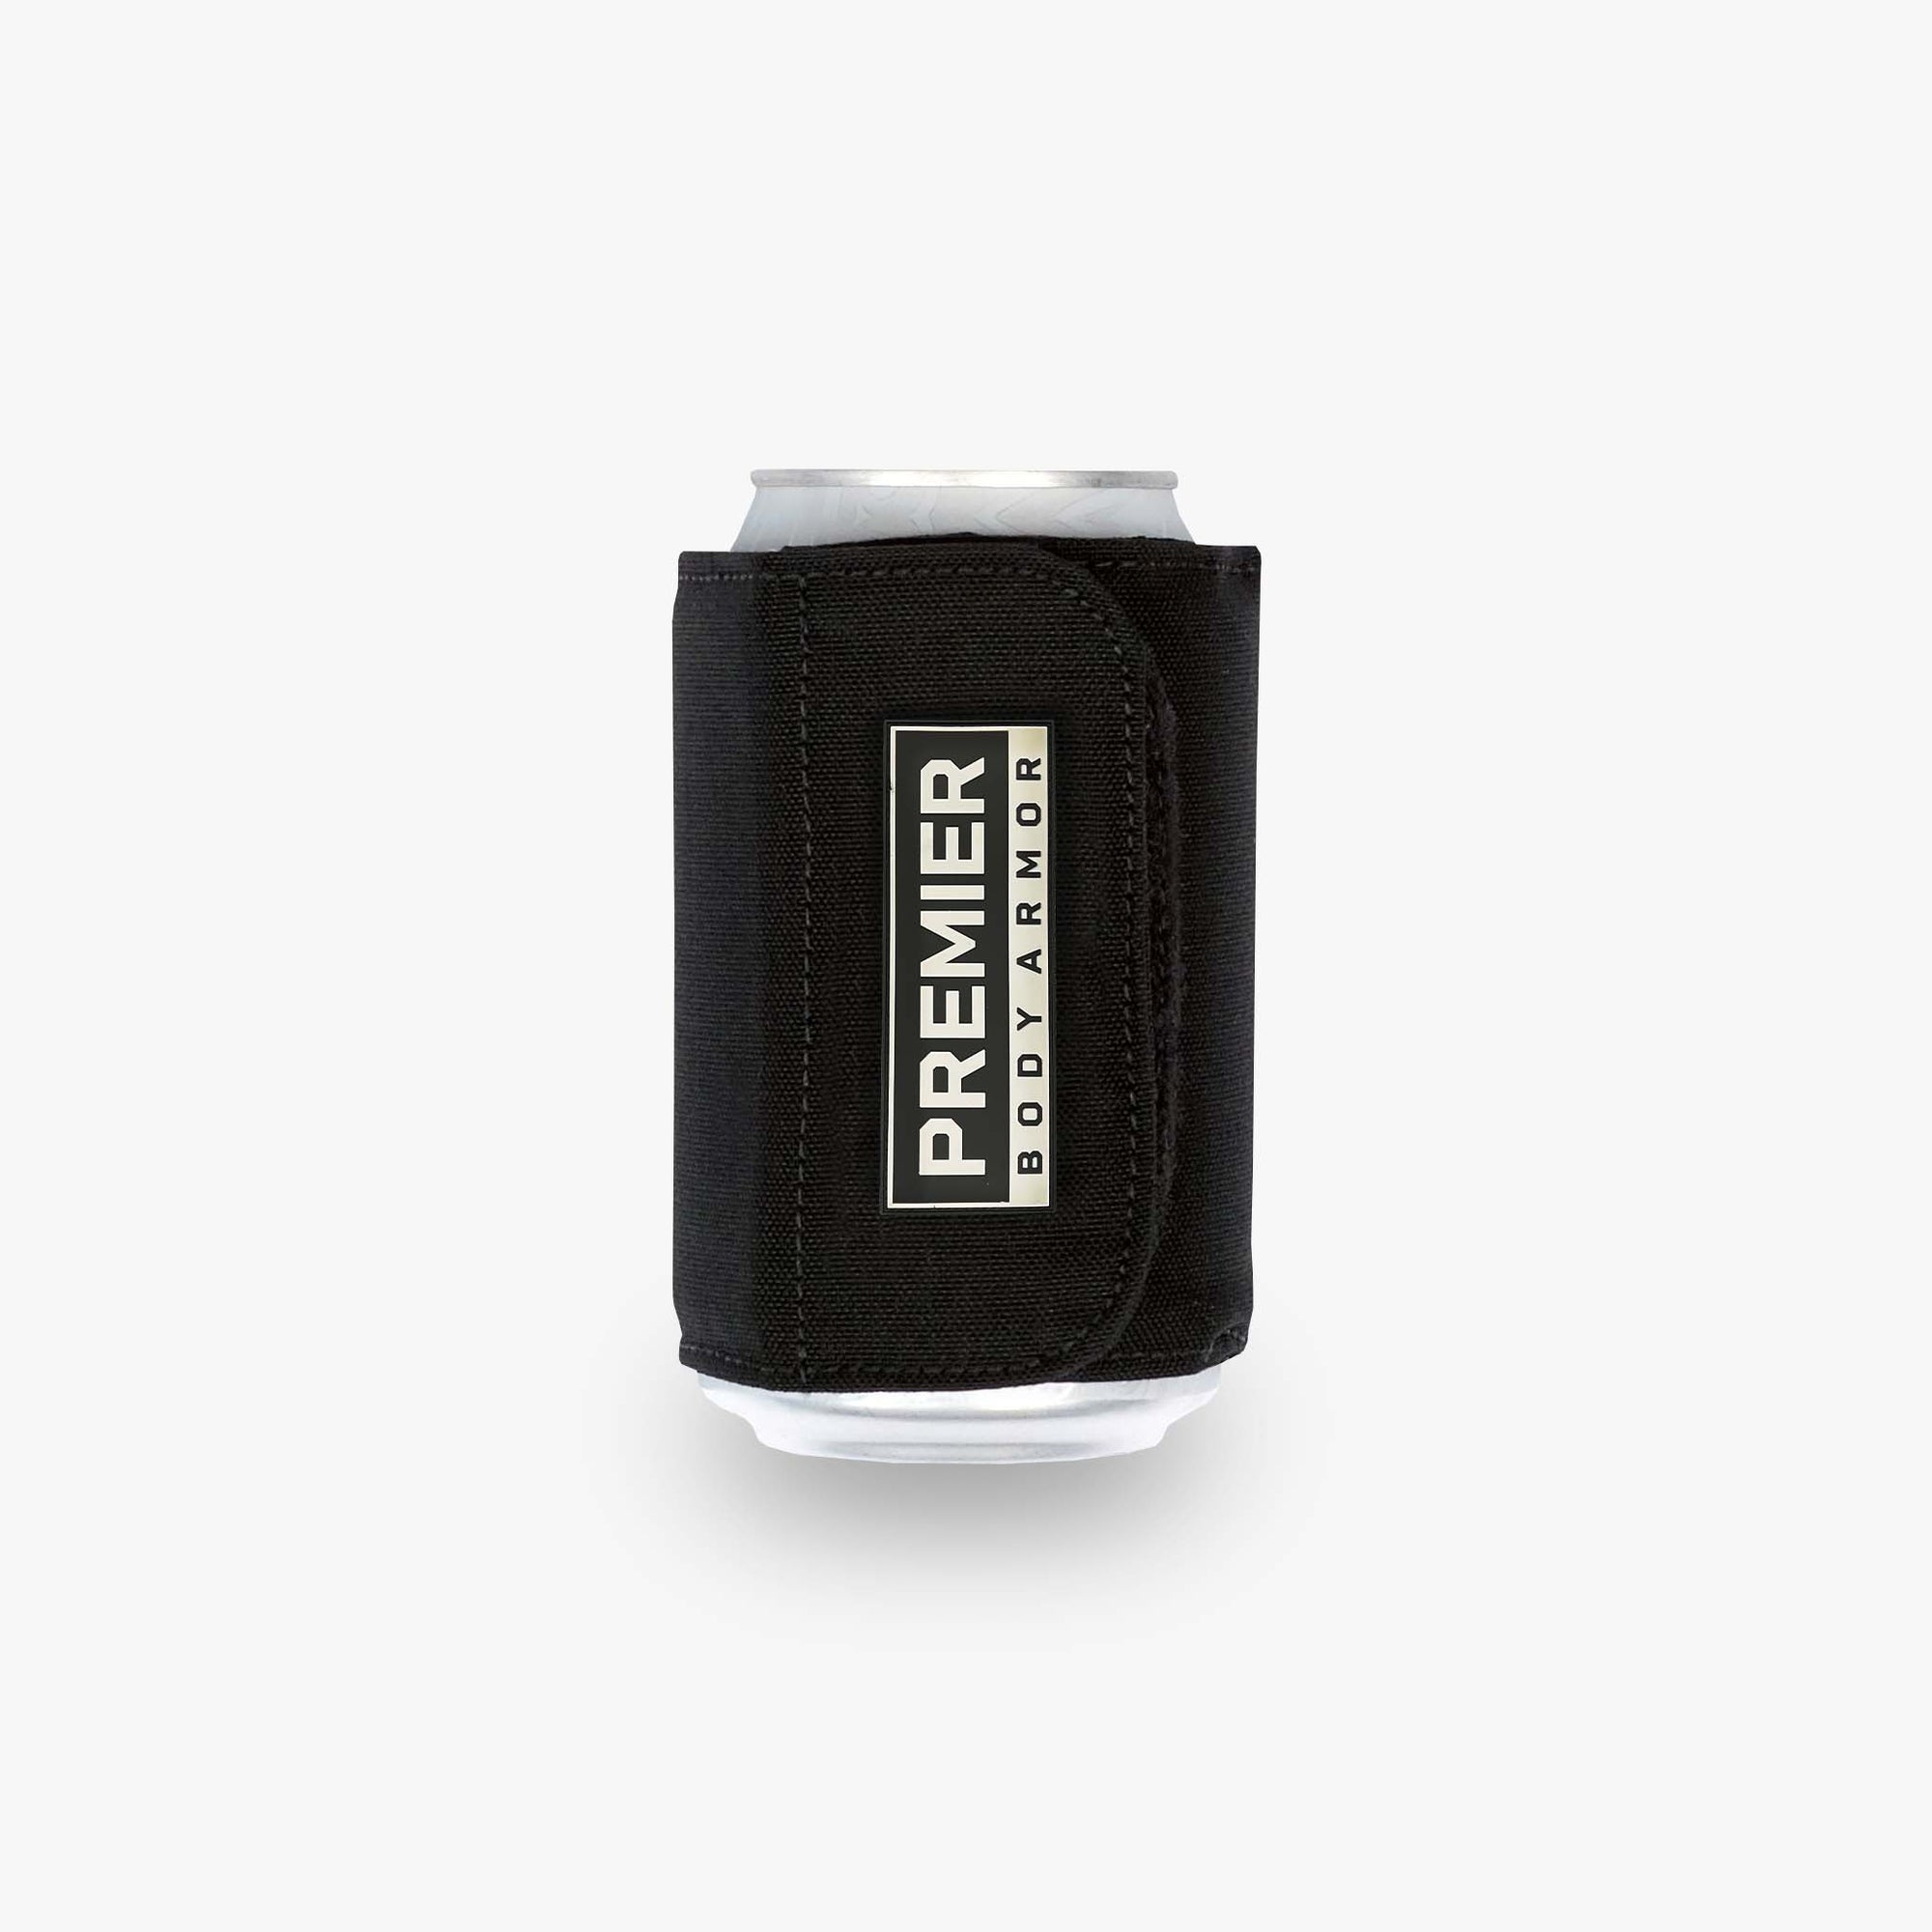 Image of black bulletproof koozie. This can cooler is rated at level 2 body armor.